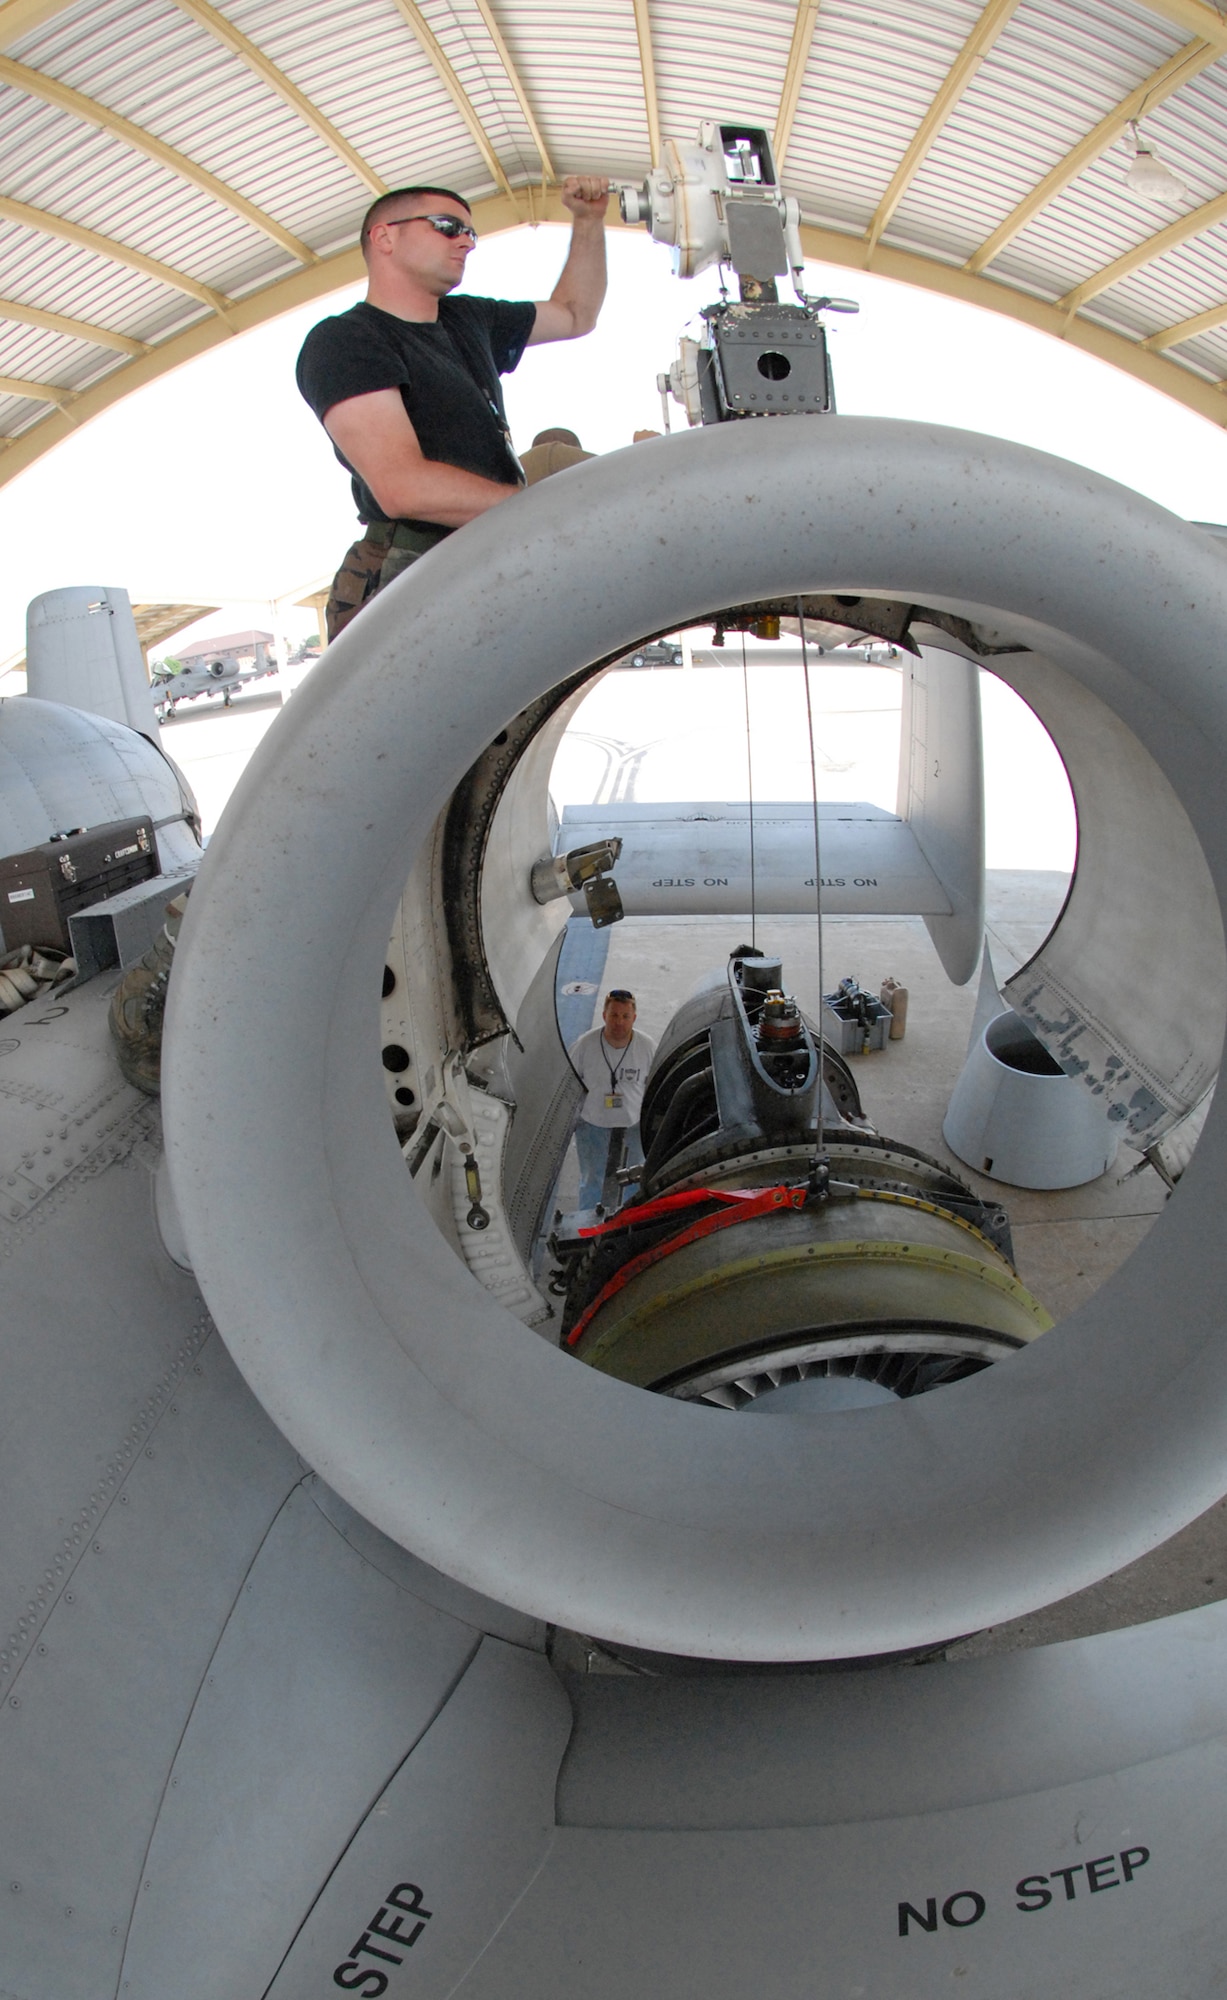 Tech. Sgt. Aaron Berry uses a hoist to lower a TF-34-100A turbo fan engine onto a trailer at Whiteman Air Force Base, Mo., June 2, 2009.  This particular engine set a longevity record in the 442nd Fighter Wing after being installed on the same aircraft for 10 years.  During that time the engine operated 3,464.4 hours.  Sergeant Berry is a crew chief in the 442nd Aircraft Maintenance Squadron.  The 442nd is an Air Force Reserve unit based at Whiteman.  (U.S. Air Force photo/Master Sgt. Bill Huntington